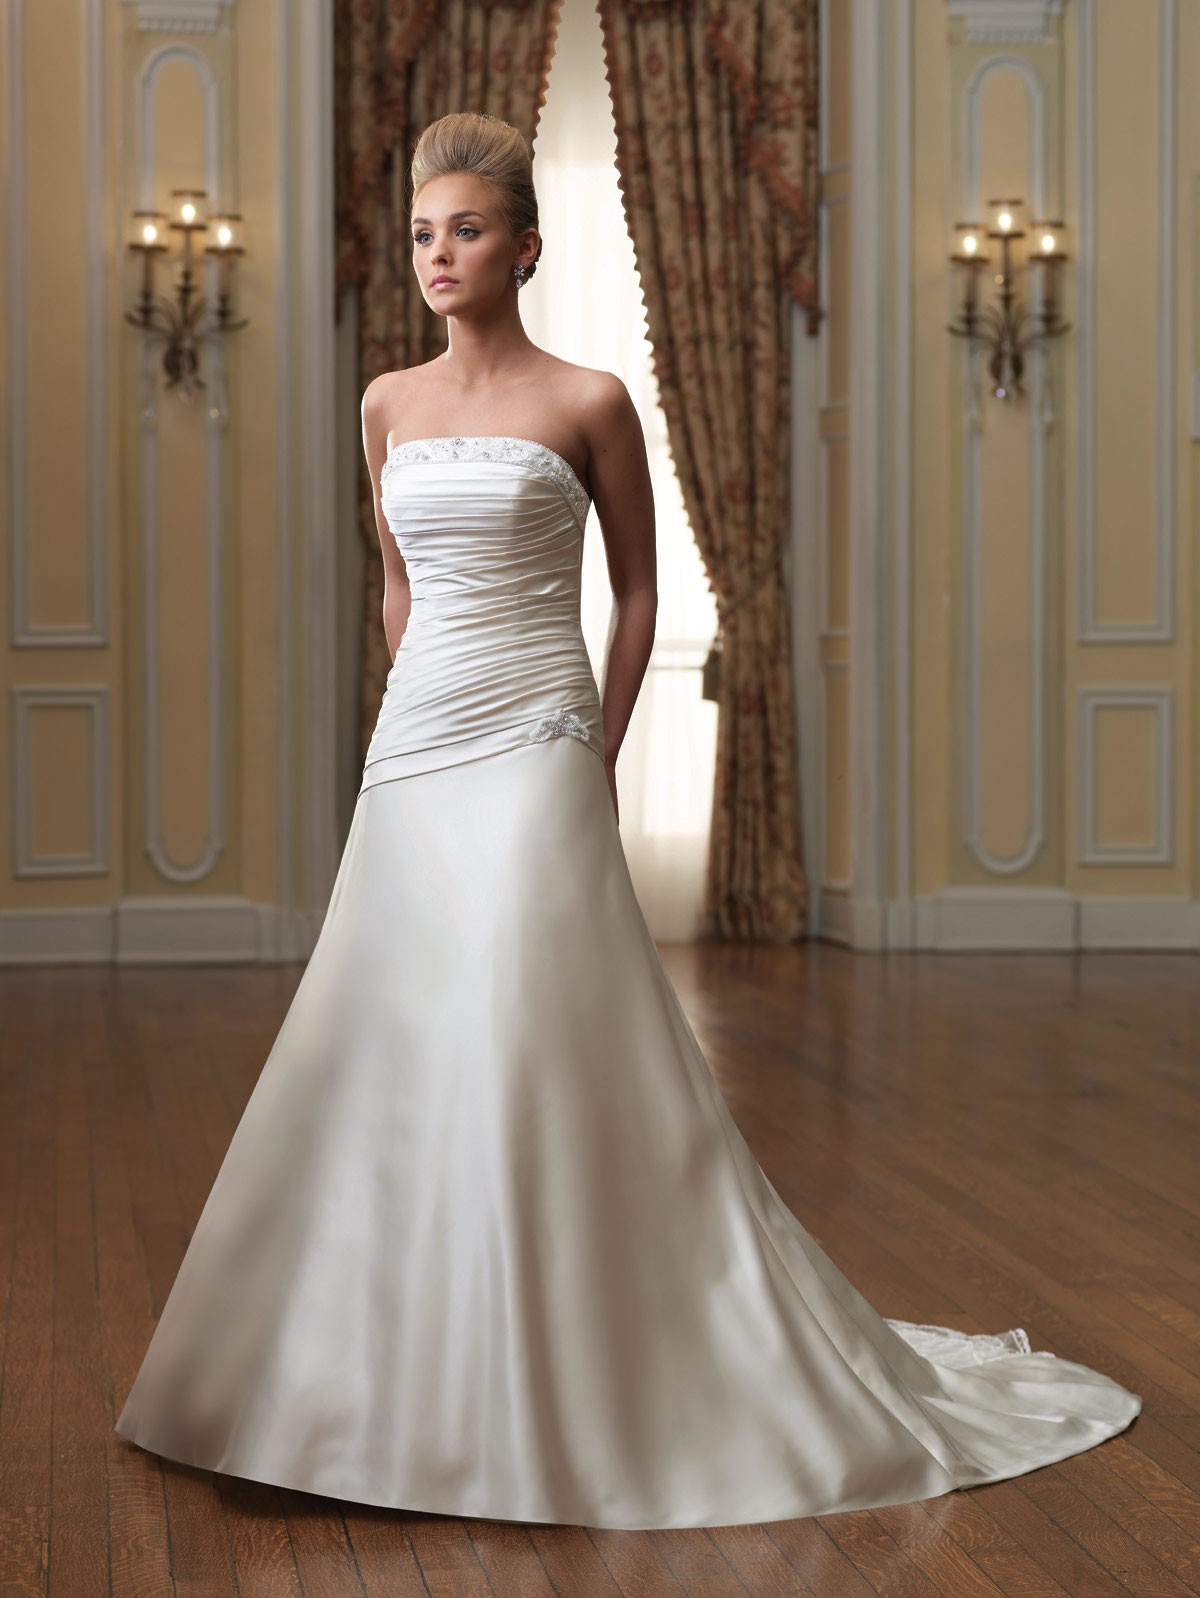 Collection Strapless Wedding Gown Pictures - Weddings Pro